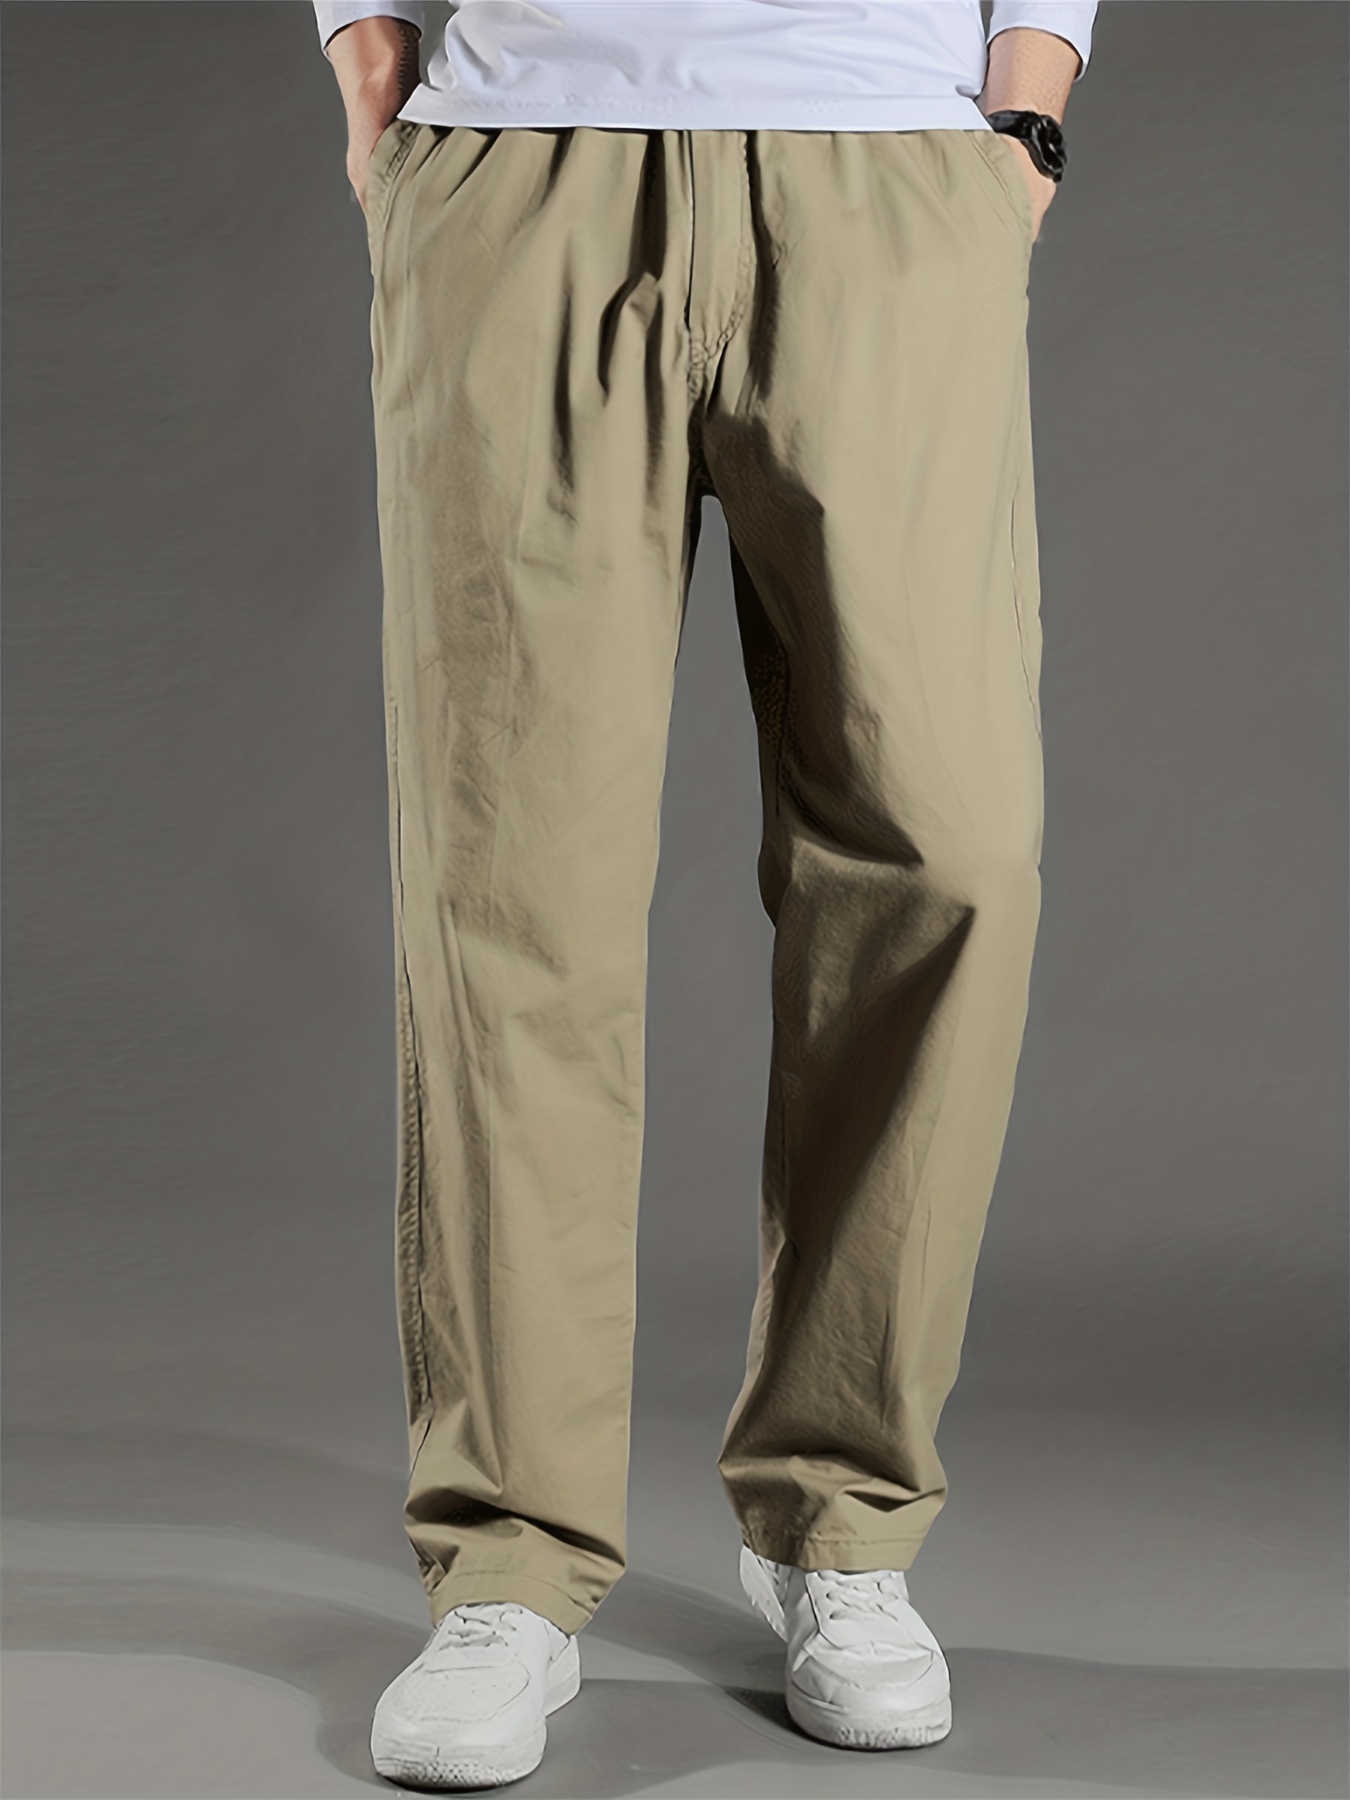 Men's Plain Cotton Cargo Pants, Thin Casual Loose Pants For Outdoor Work,  Men's Clothing